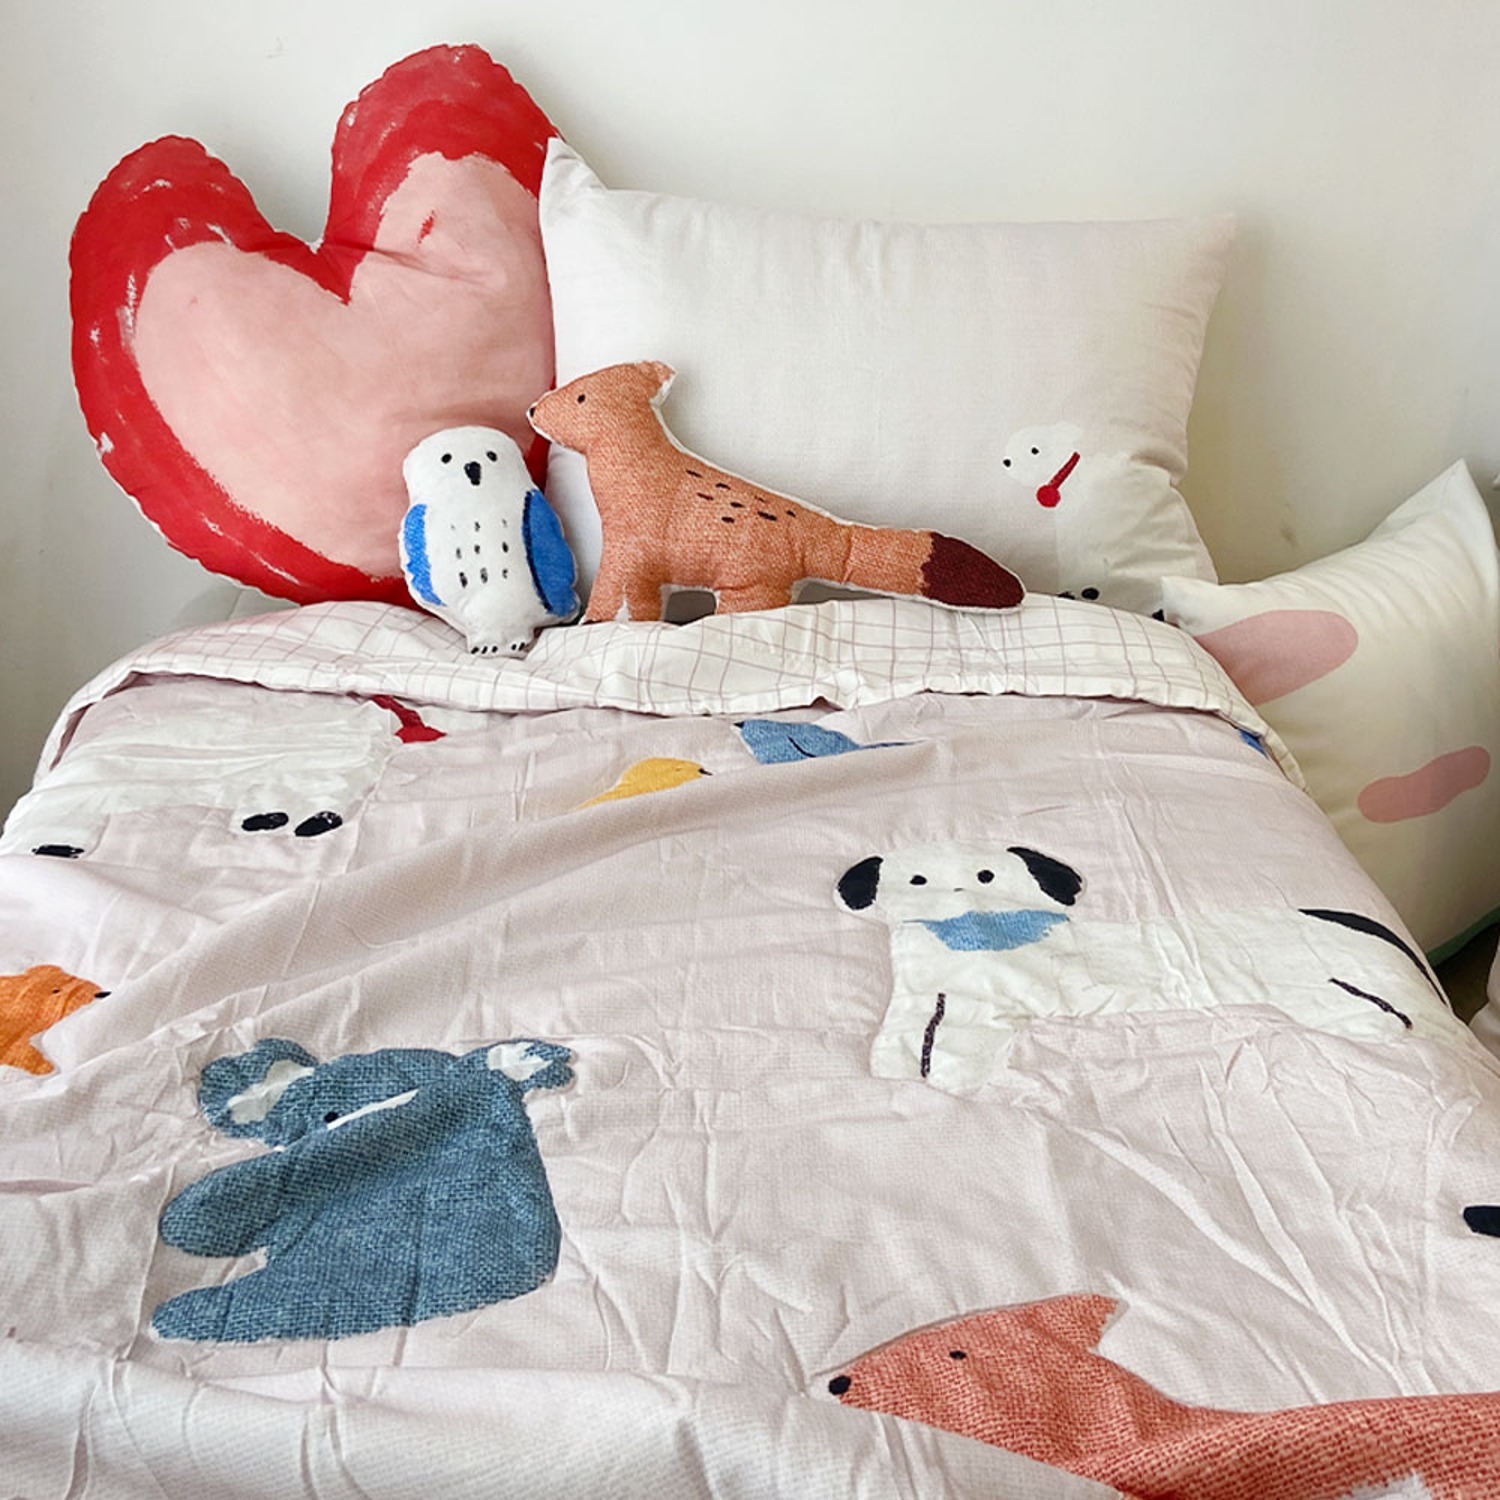 [drawing AMY] Coincoin summer bed comforter set